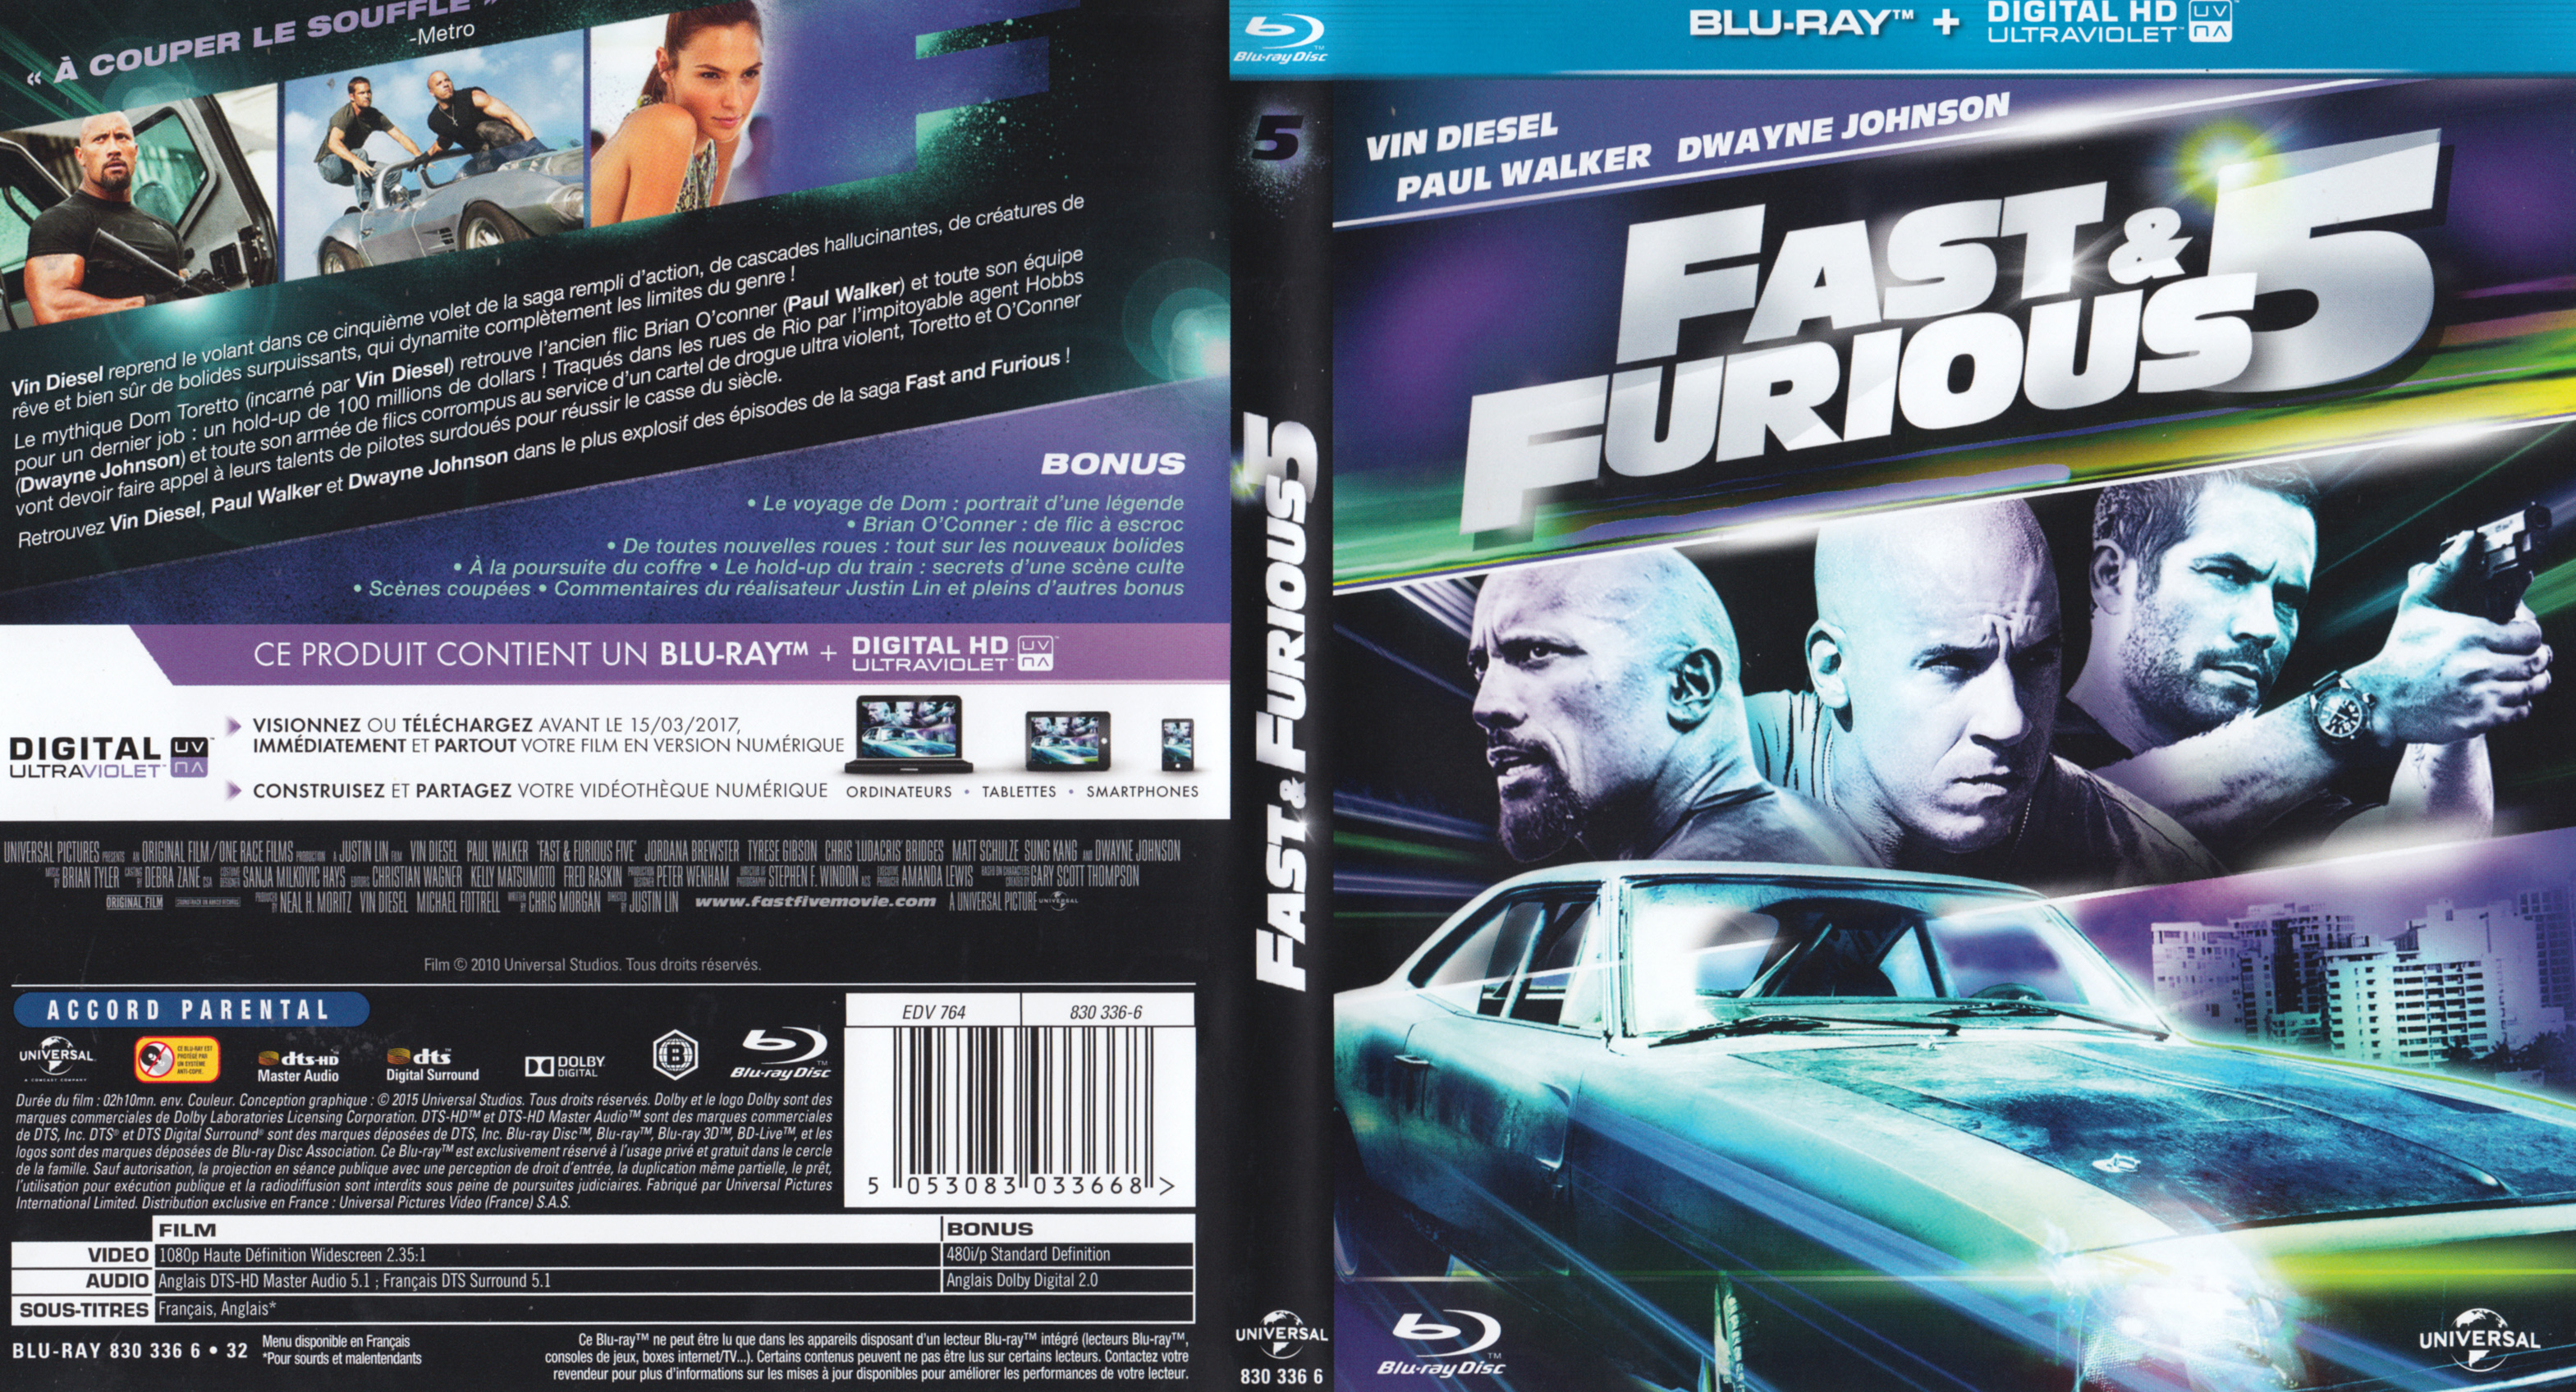 Jaquette DVD Fast and furious 5 (BLU-RAY) v2